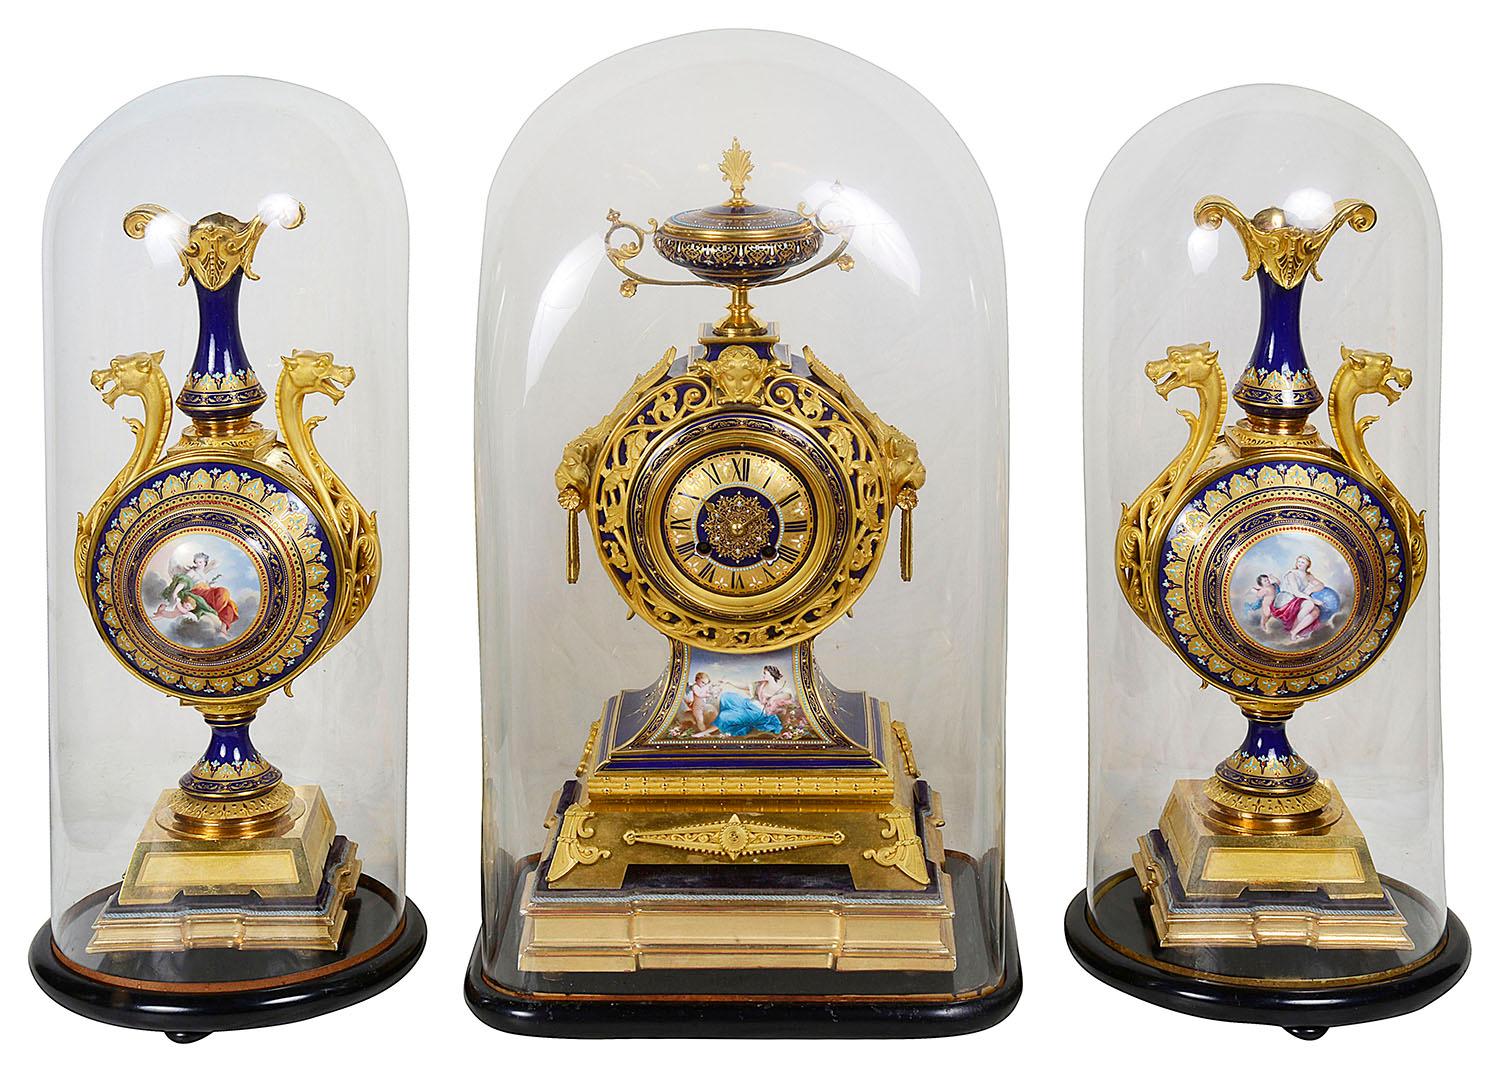 A very good quality 19th century French gilded ormolu and Sevres style porcelain clock set. Having glass domes to all three pieces. The clock has an ormolu urn to the top, the cobalt blue porcelain with gilded motif decoration. The porcelain face